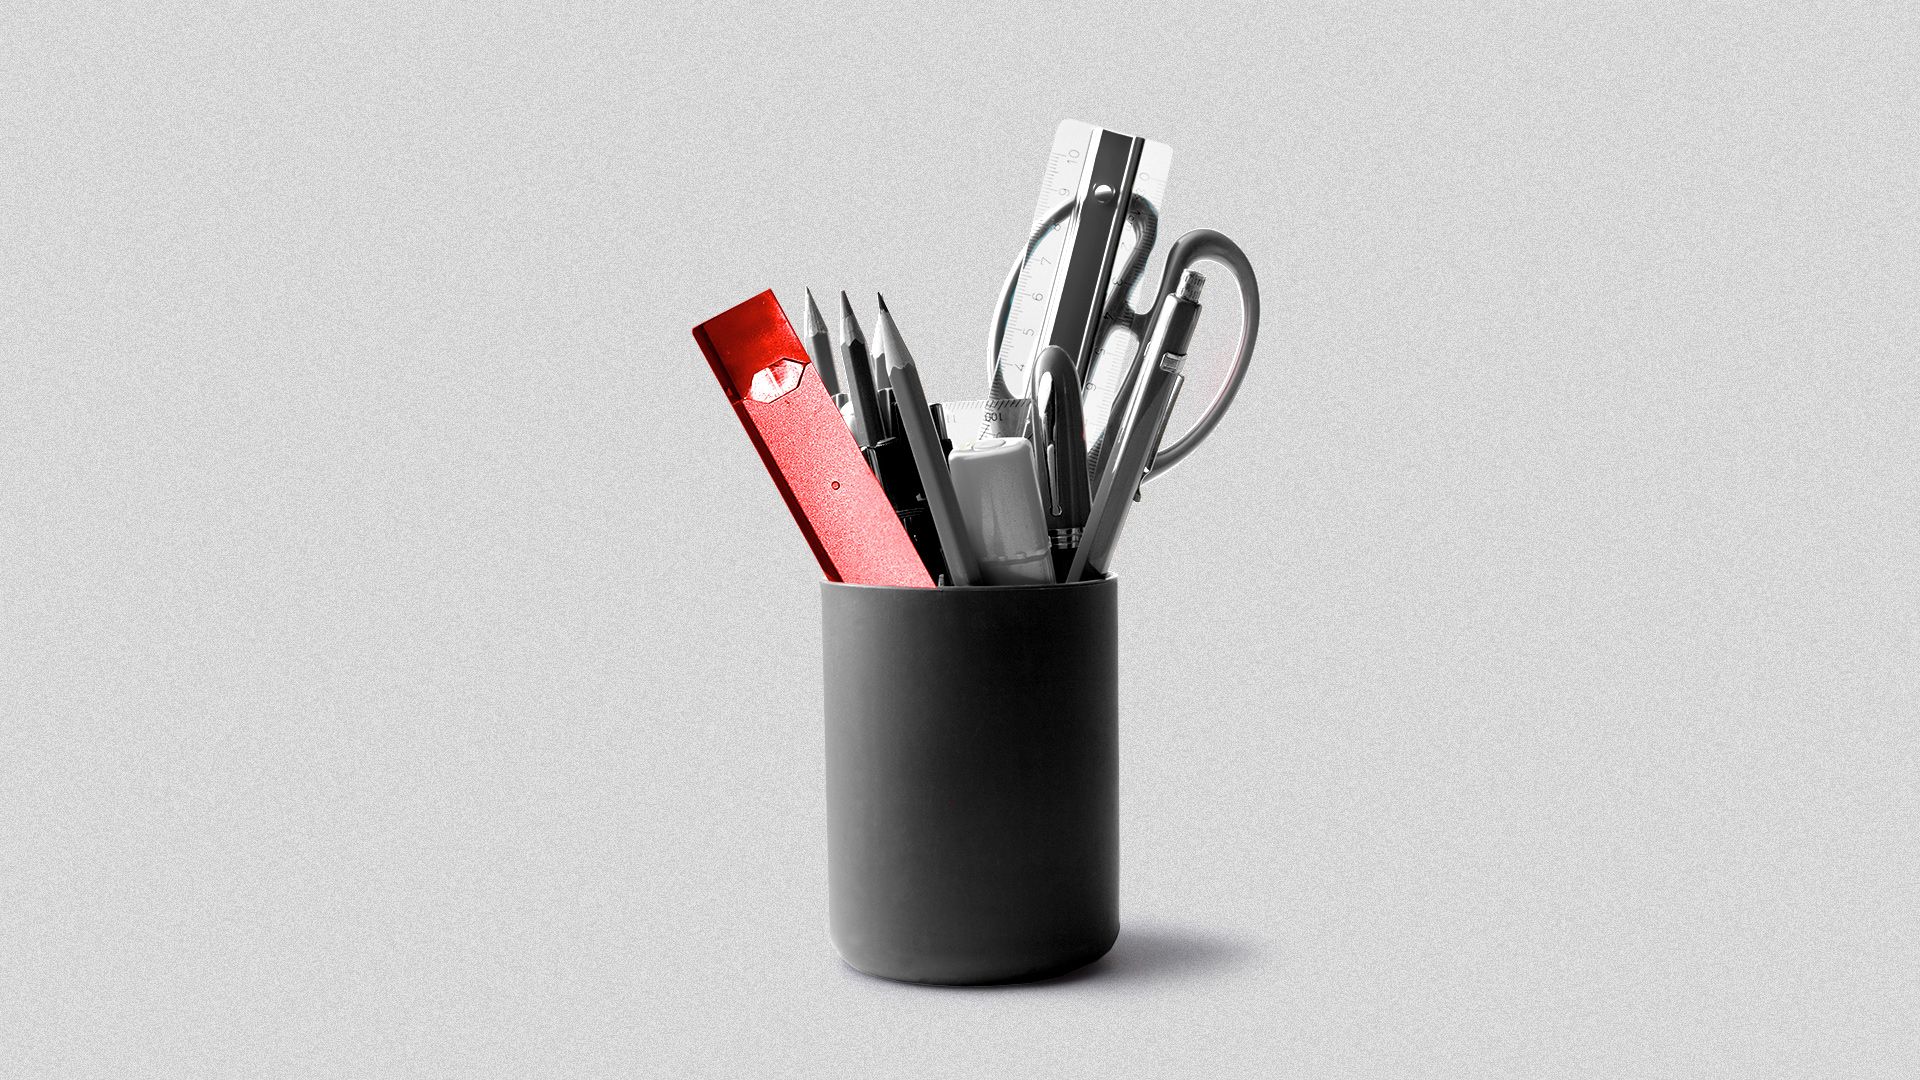 Illustration of a cup of school supplies with a juul in the cup.